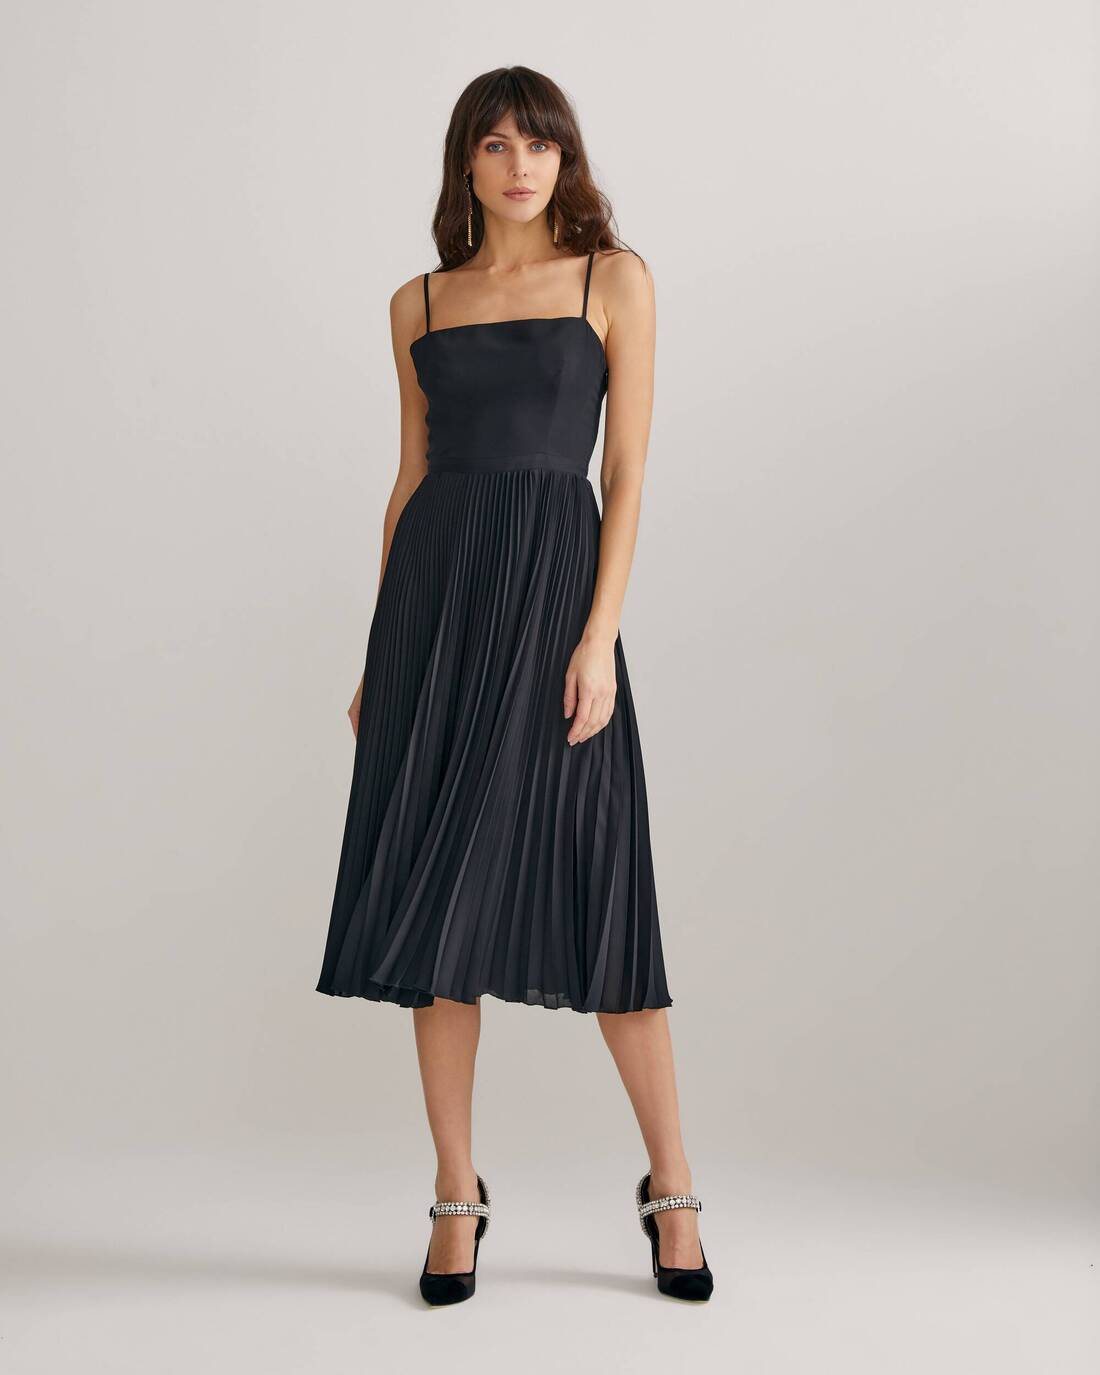 Dress with a pleated skirt